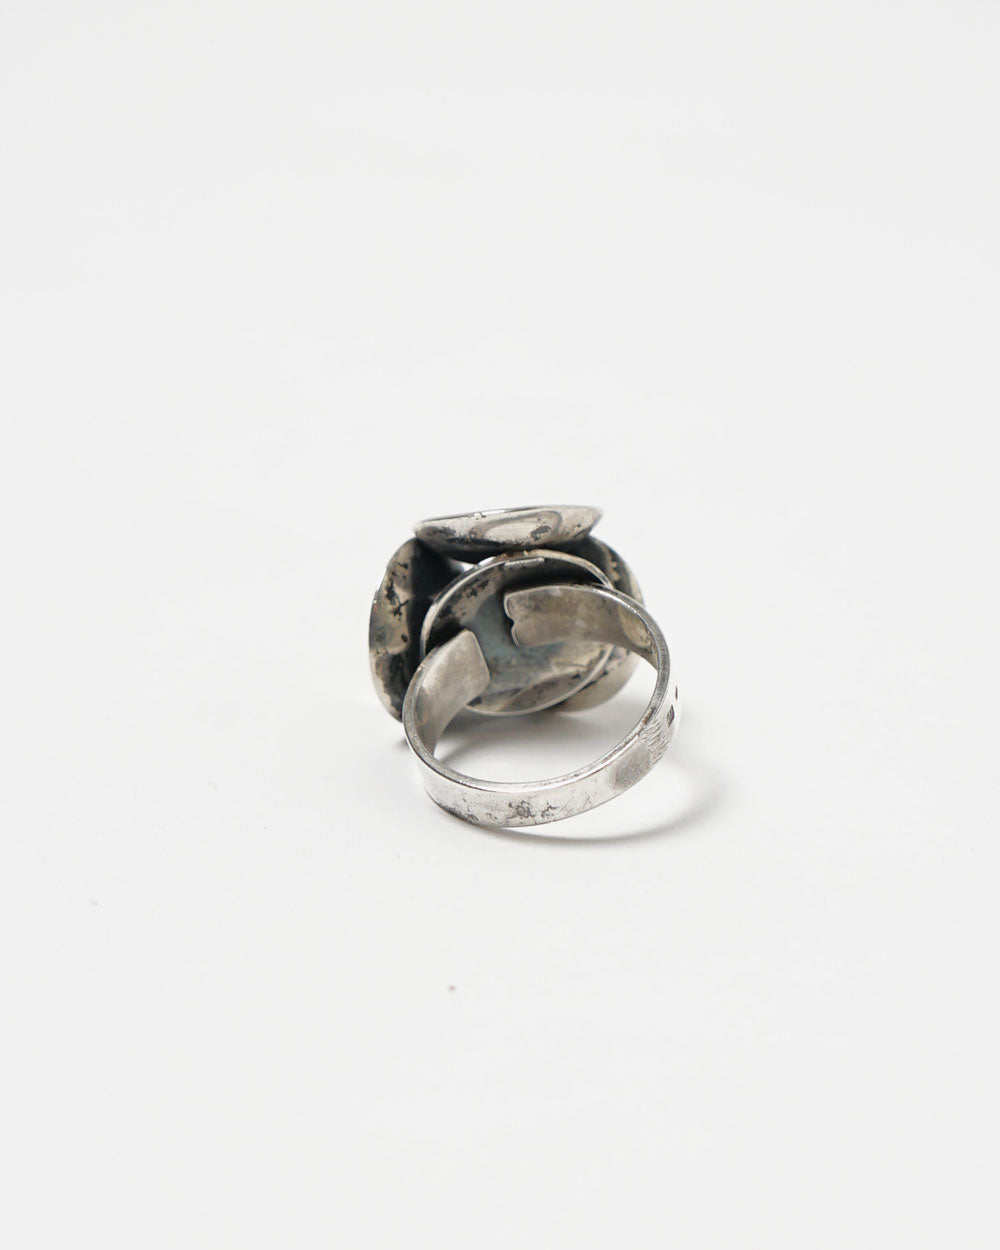 Silver Ring / size: 7.75